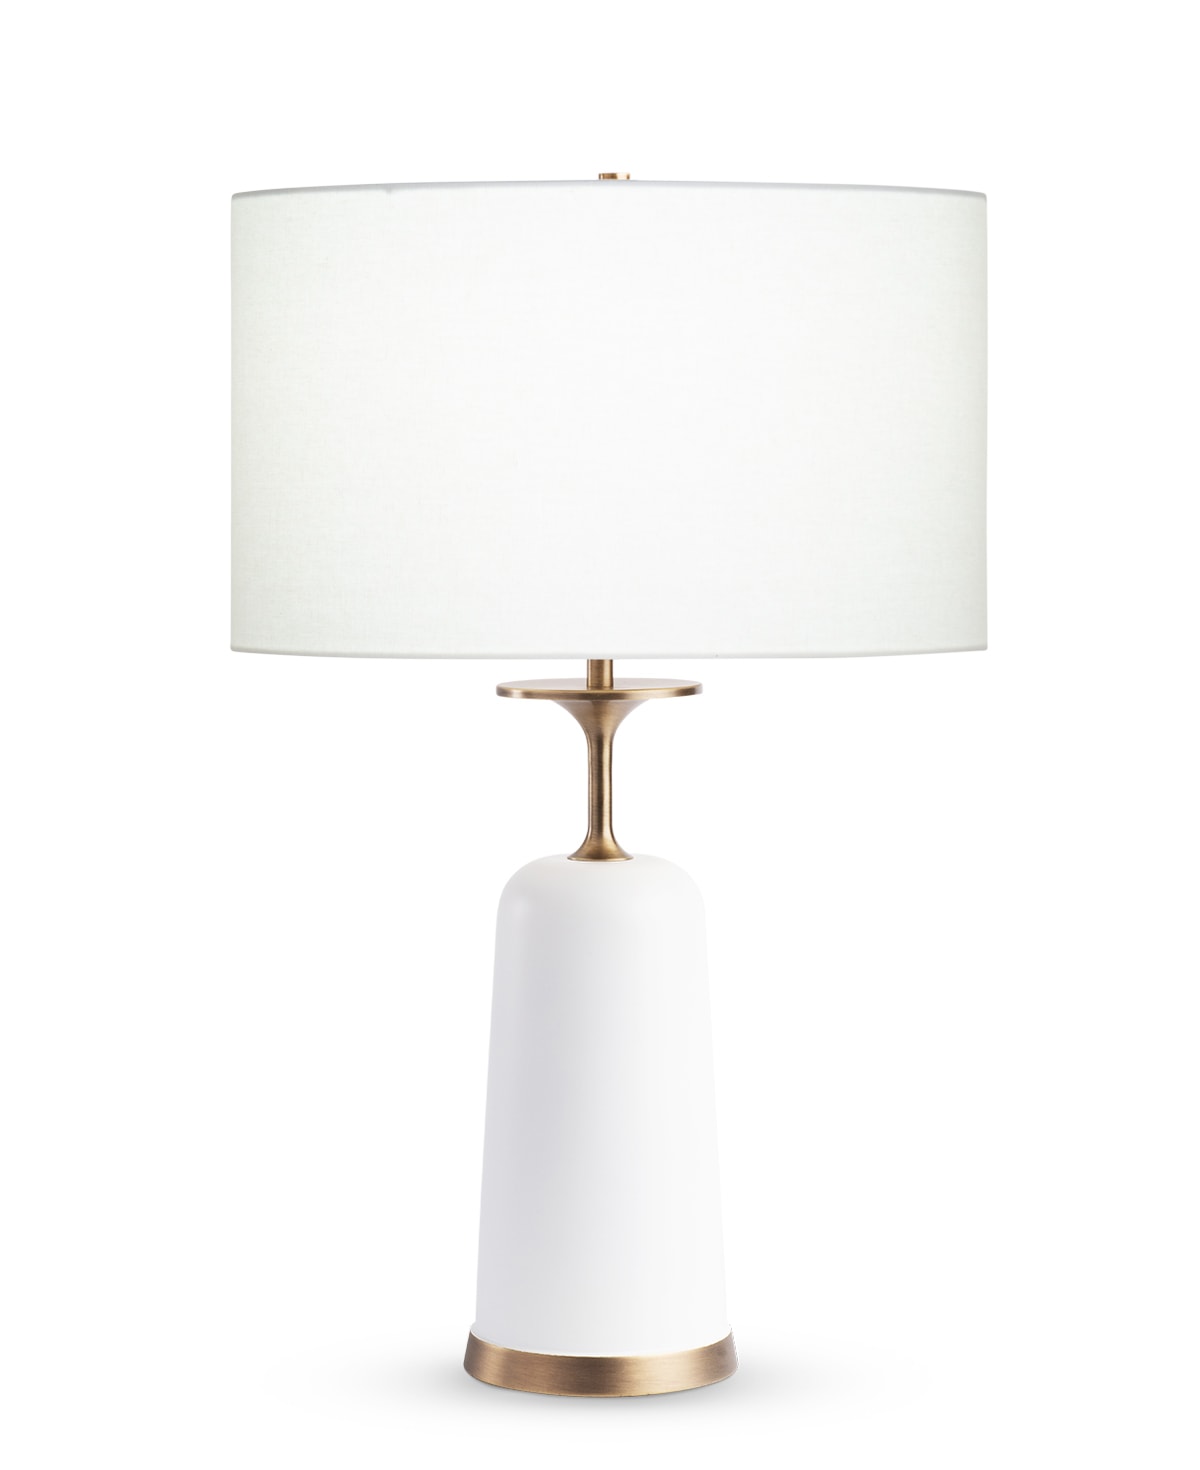 FlowDecor Judith Table Lamp in brass with antique brass & matte off-white finishes and off-white linen drum shade (# 4590)